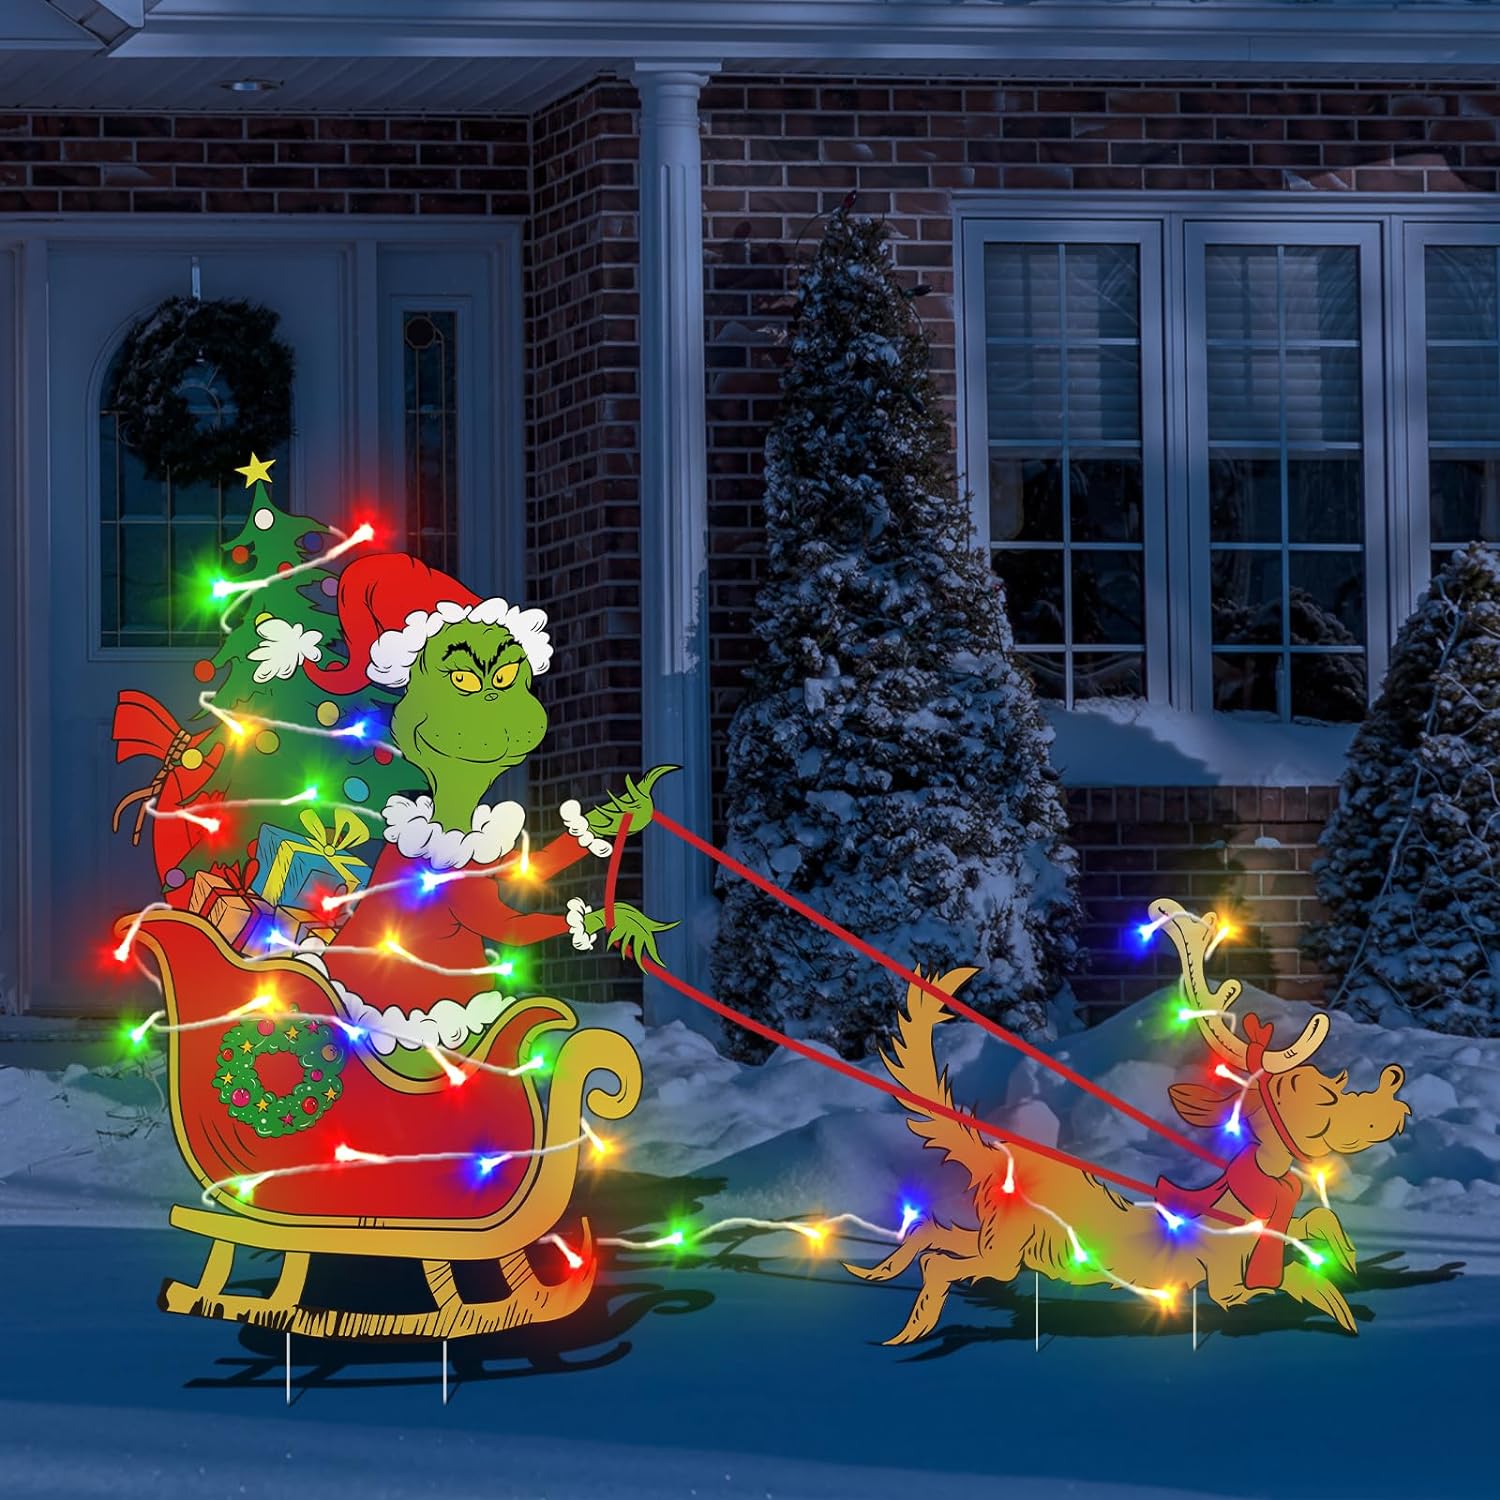 Outdoor Christmas Decorations for Yard - 2pcs Plastic Sleigh Dog Gnome Christmas Yard Signs with Yard Stakes, String Lights for Garden Yard Lawn Christmas Party Supplies